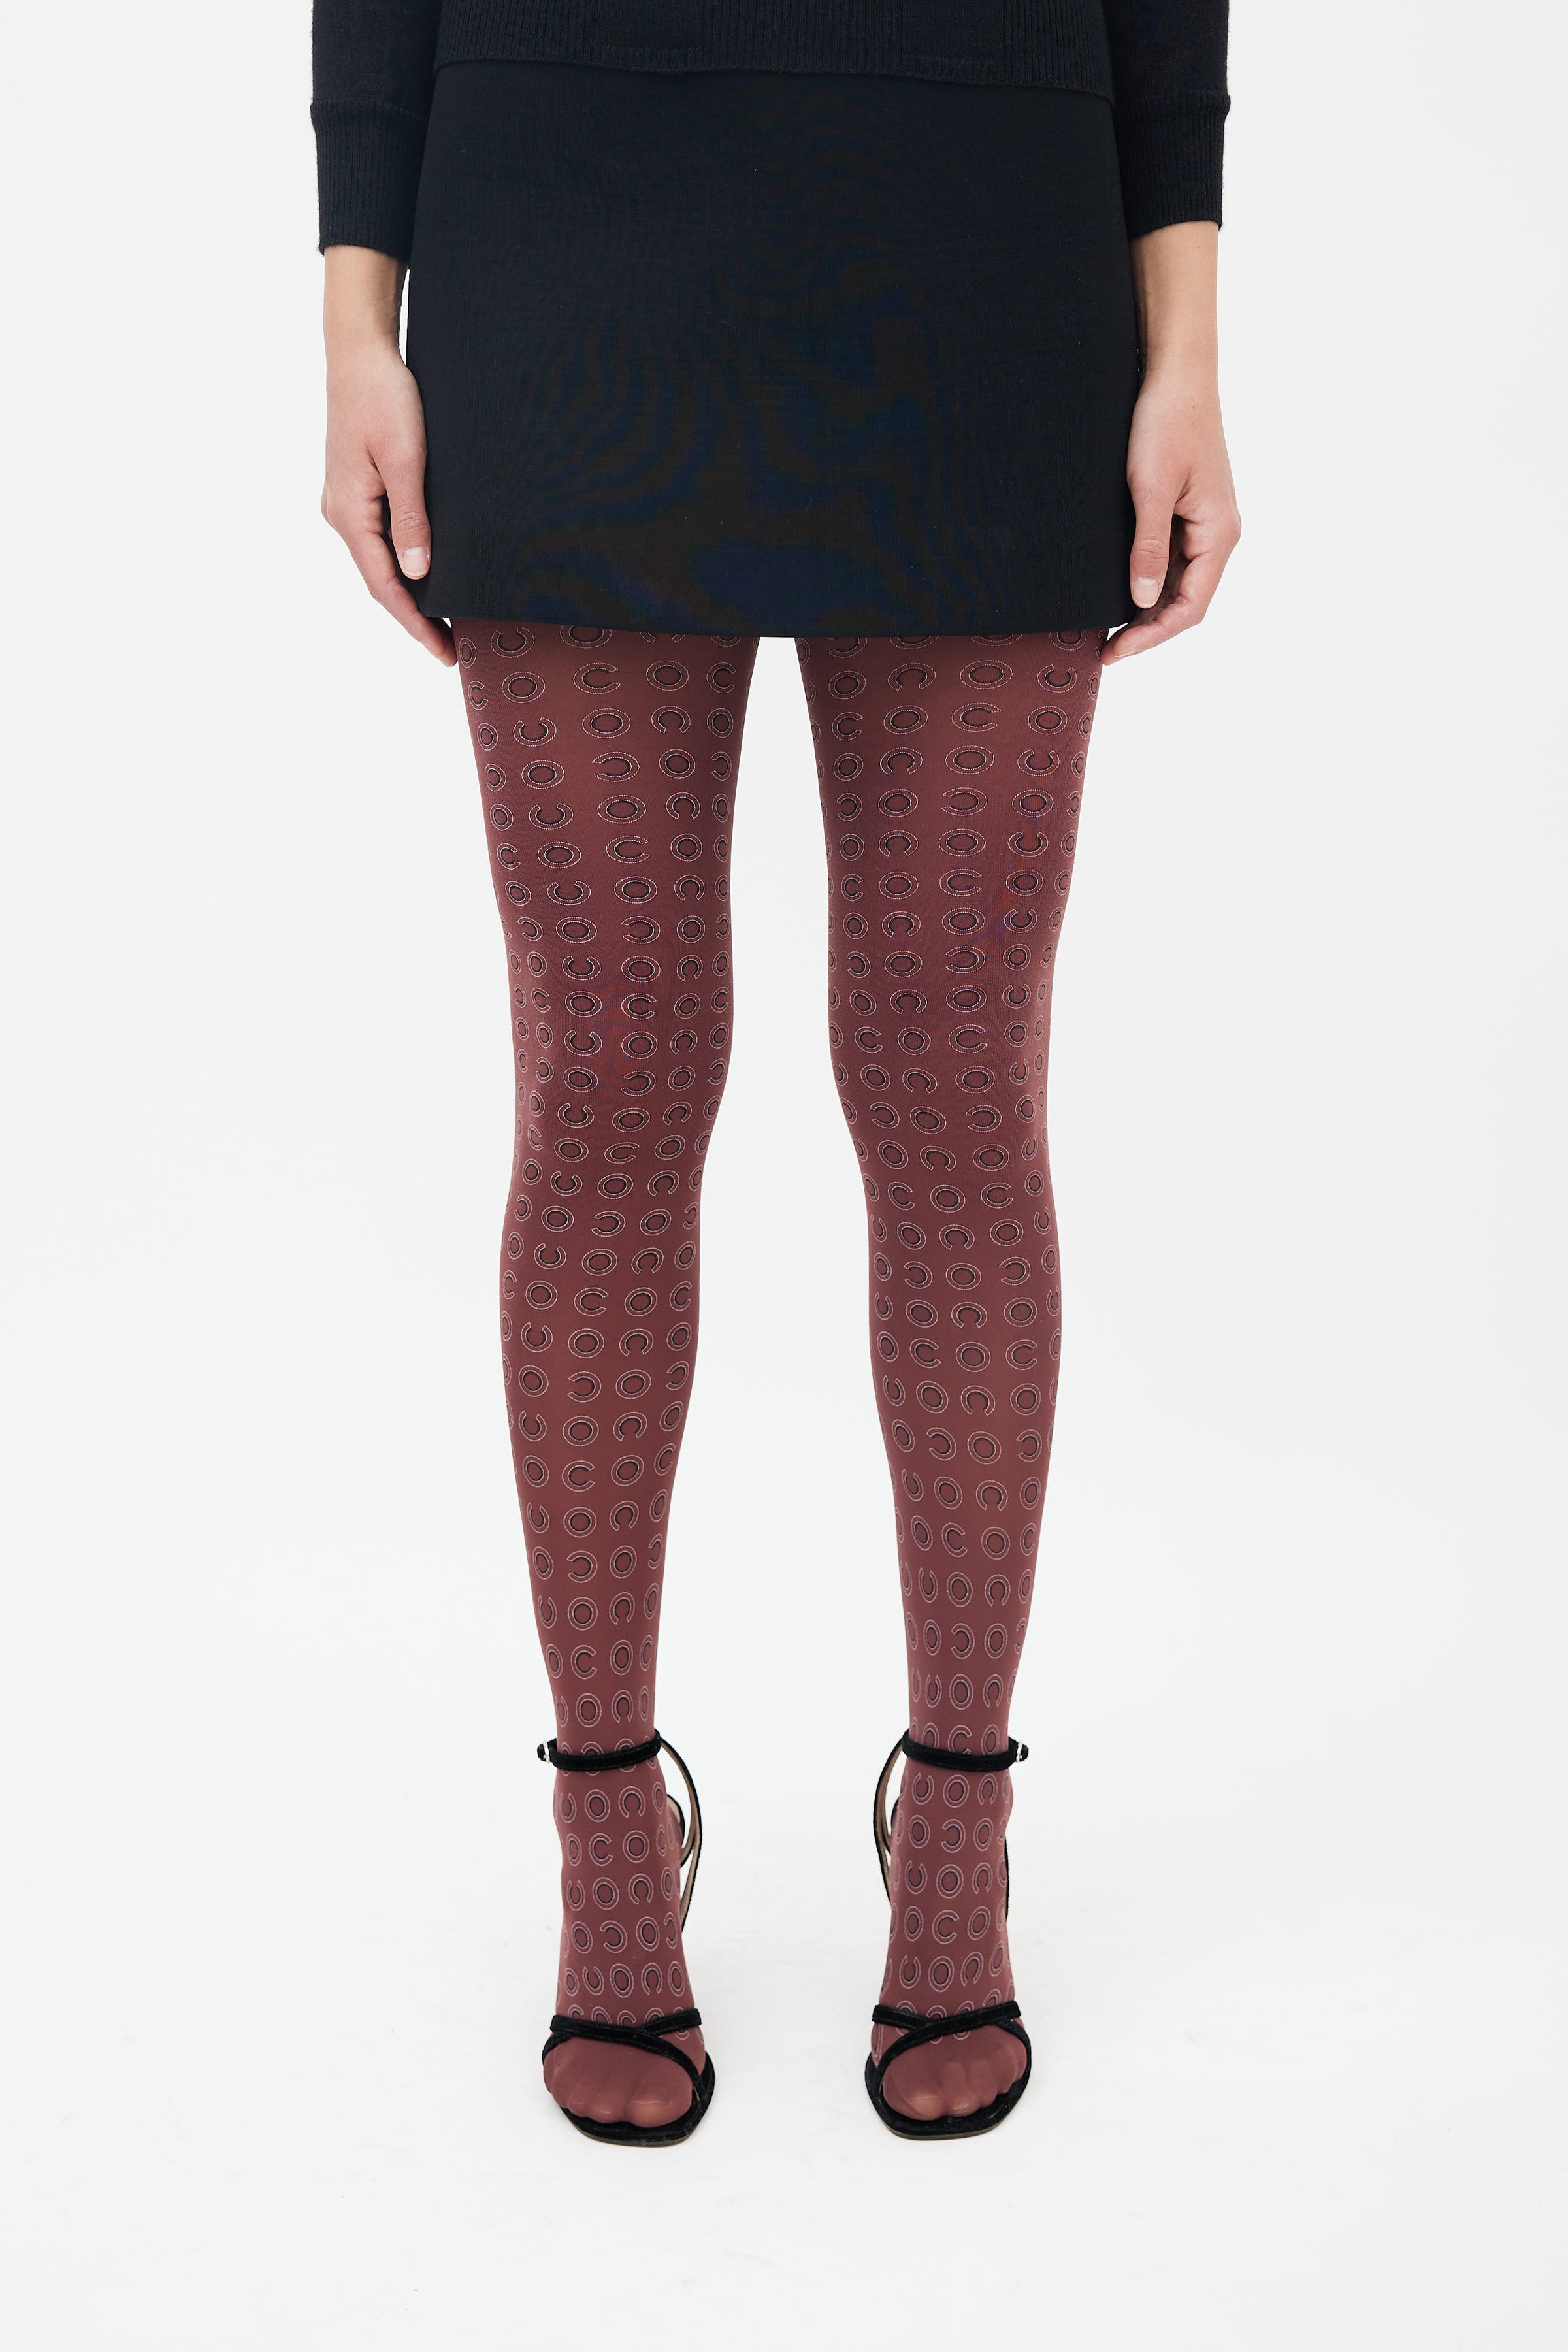 Chanel Gold and Black Glitter Tights with Coco Chanel Waist Detail